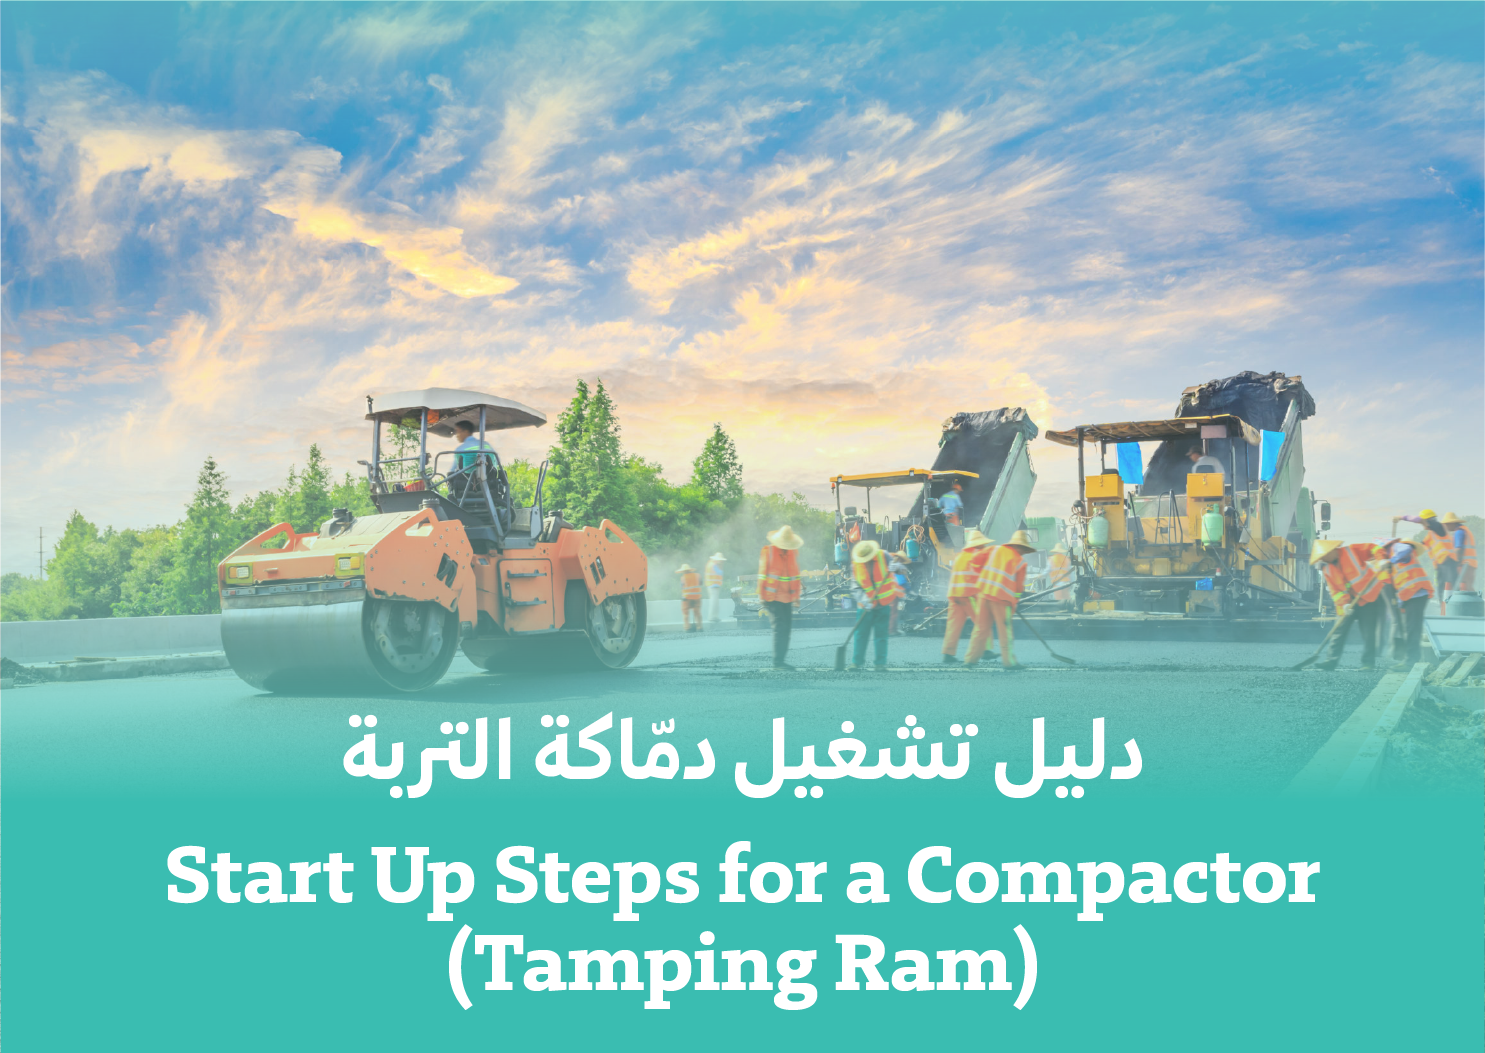  Starting Up Steps for a Compactor